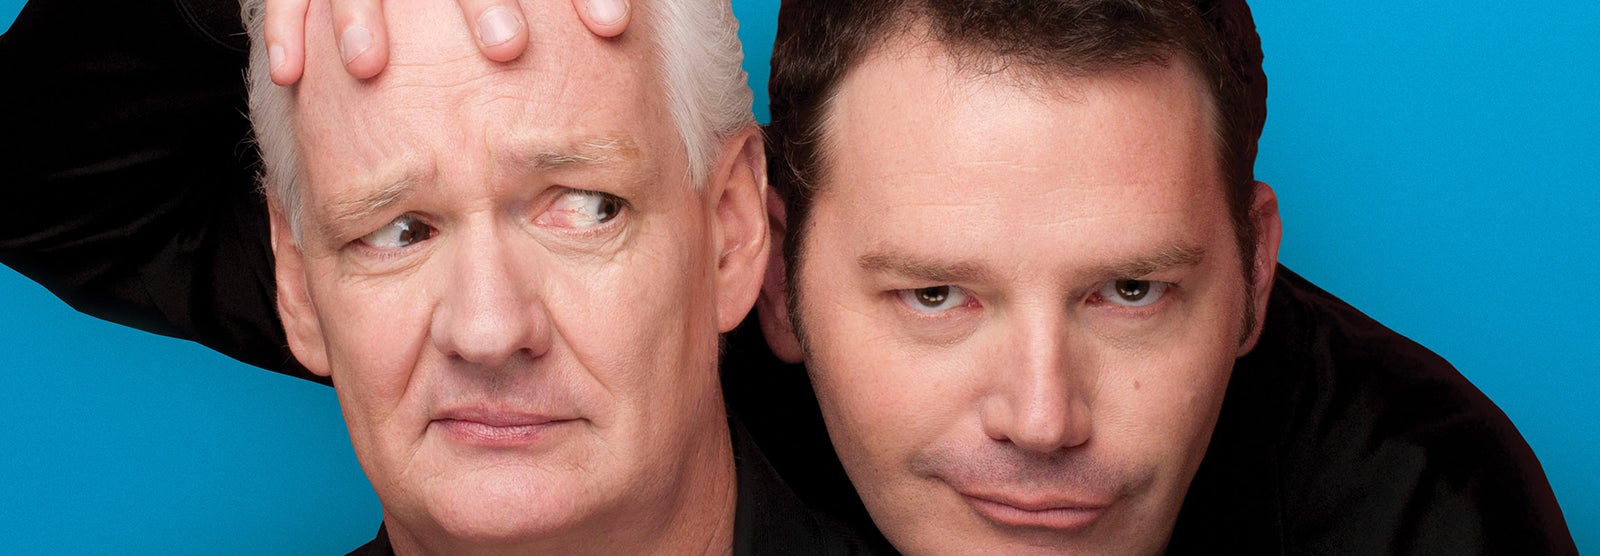 Colin Mochrie & Brad Sherwood of Whose Line is it Anyway?!